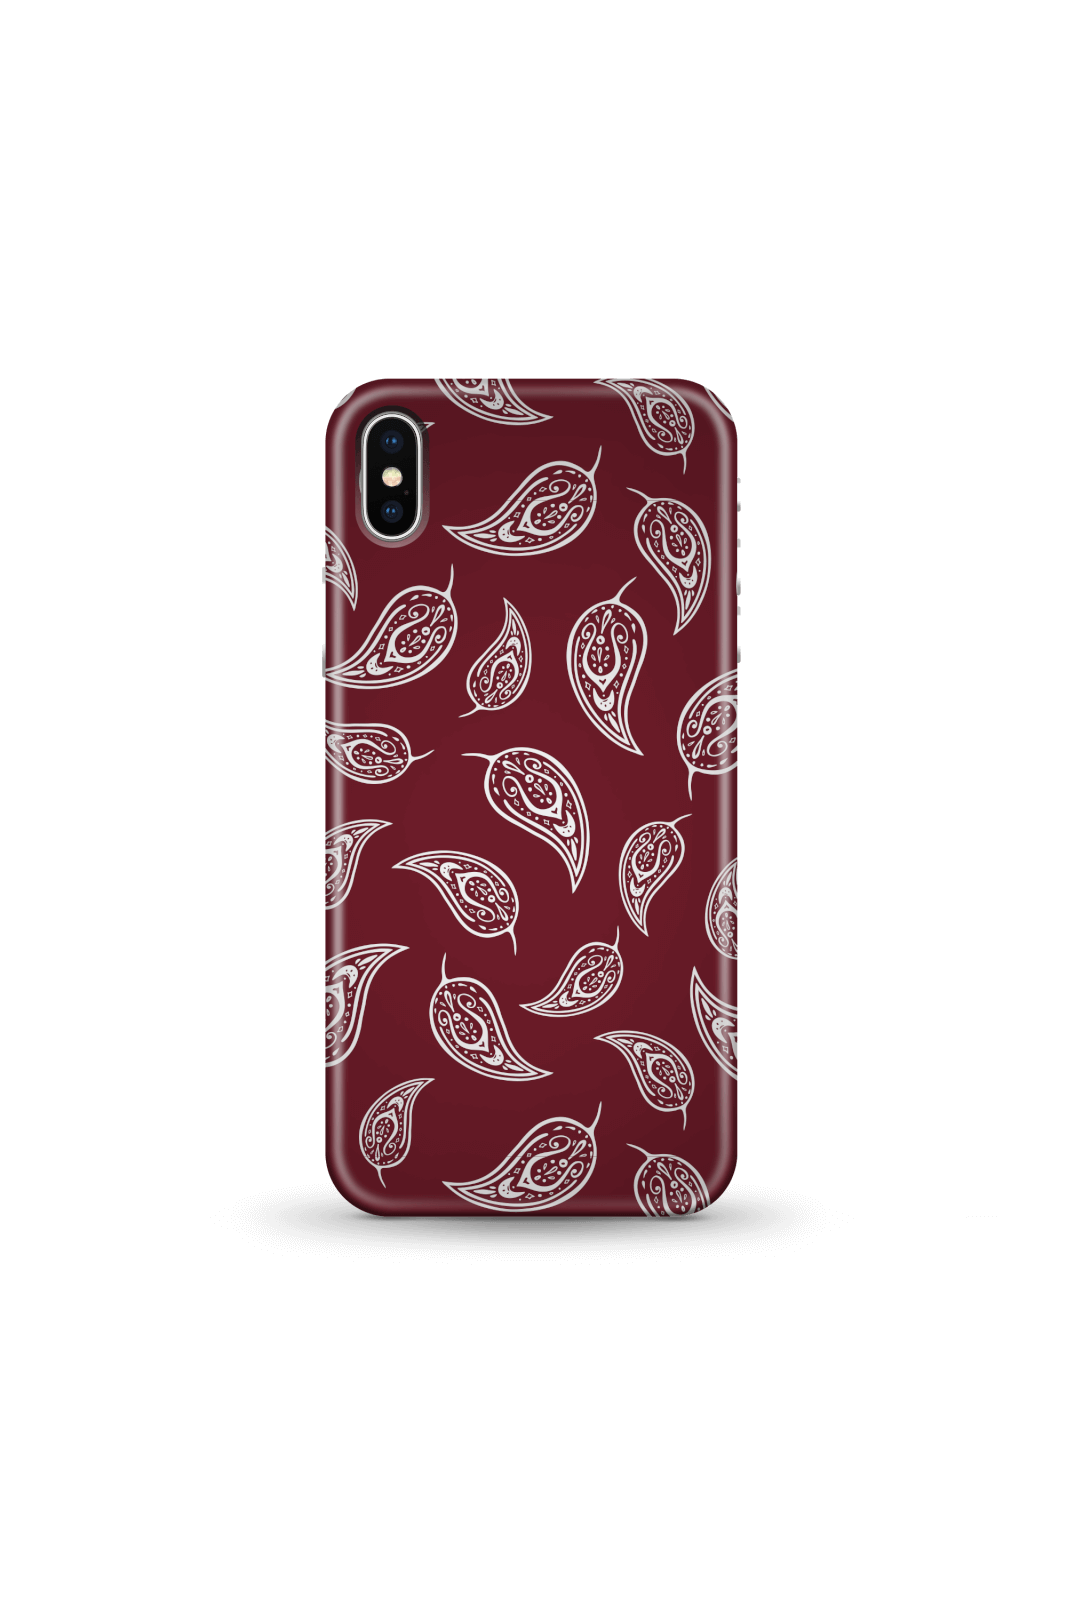 Burgundy Paisley Phone Case for iPhone and Android - iPhone 5/5s - Snap Case - Matte